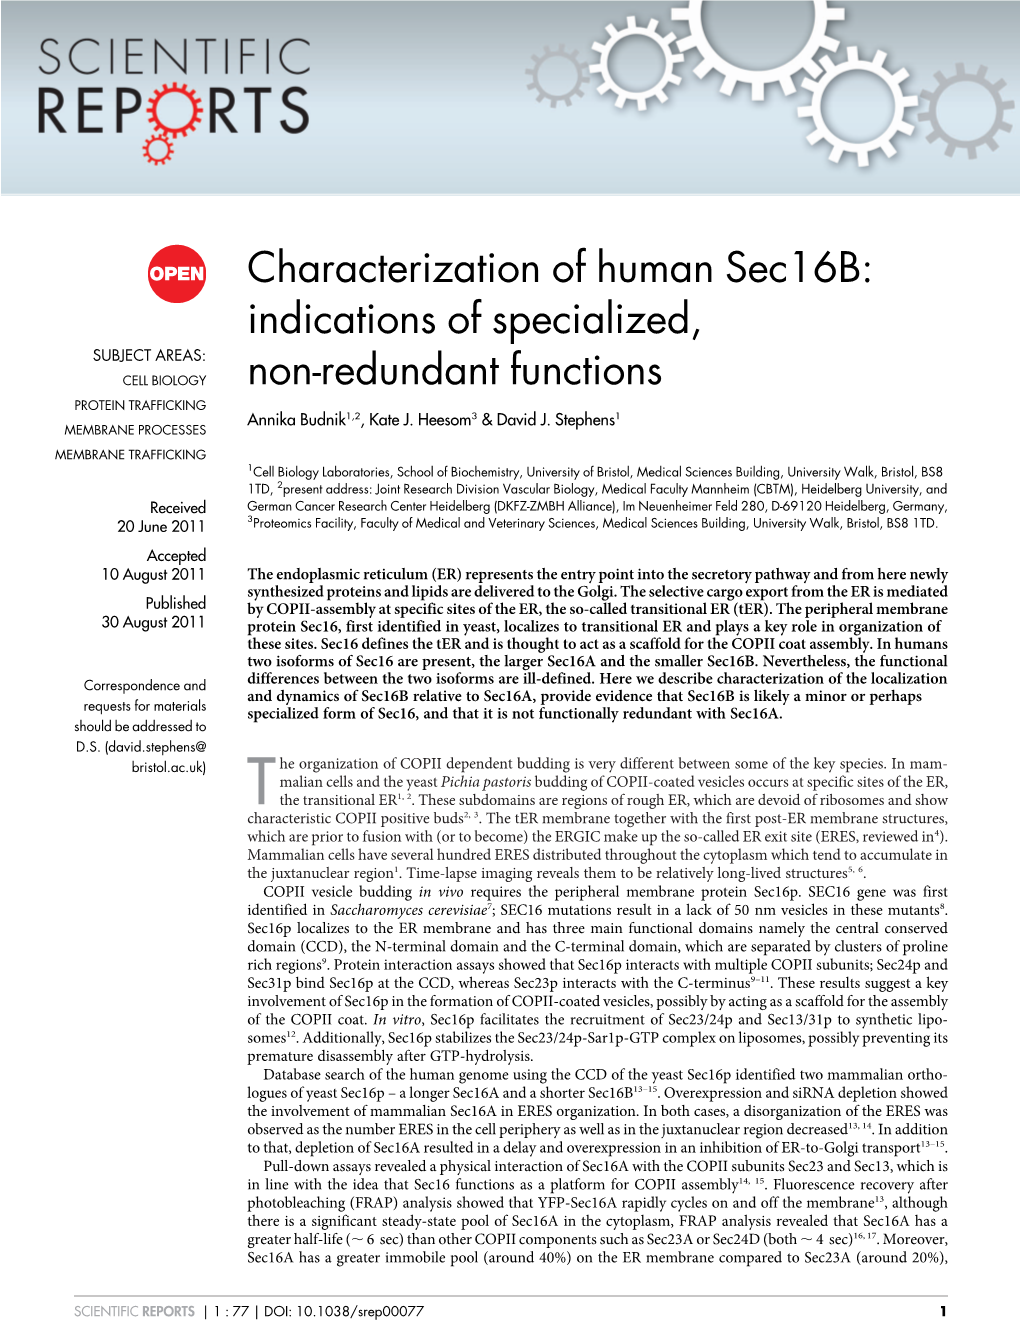 Characterization of Human Sec16b: Indications of Specialized, SUBJECT AREAS: CELL BIOLOGY Non-Redundant Functions PROTEIN TRAFFICKING Annika Budnik1,2, Kate J